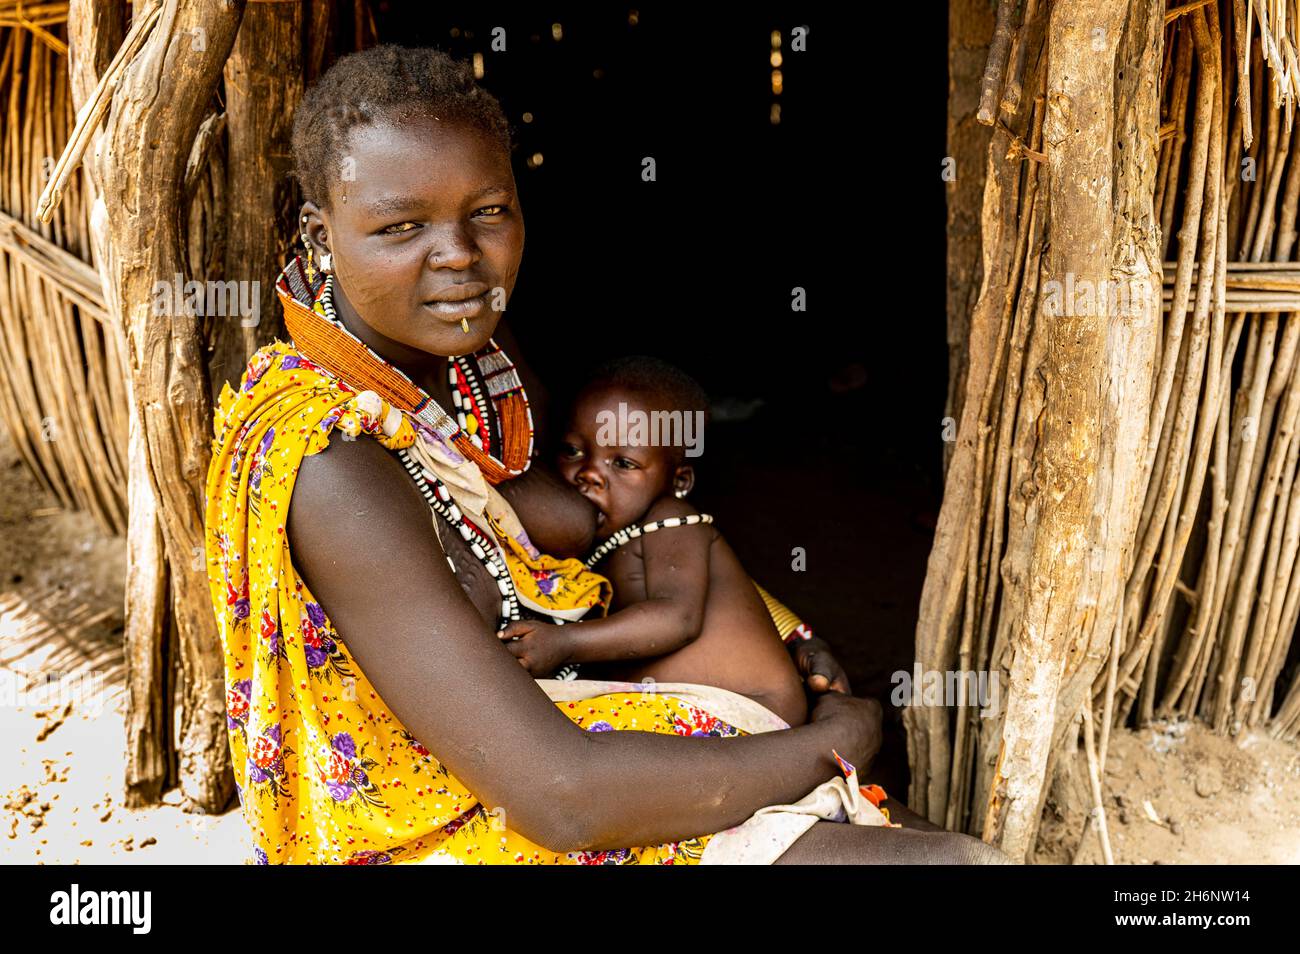 https://c8.alamy.com/comp/2H6NW14/woman-from-the-toposa-tribe-breastfeeding-her-baby-eastern-equatoria-south-sudan-2H6NW14.jpg